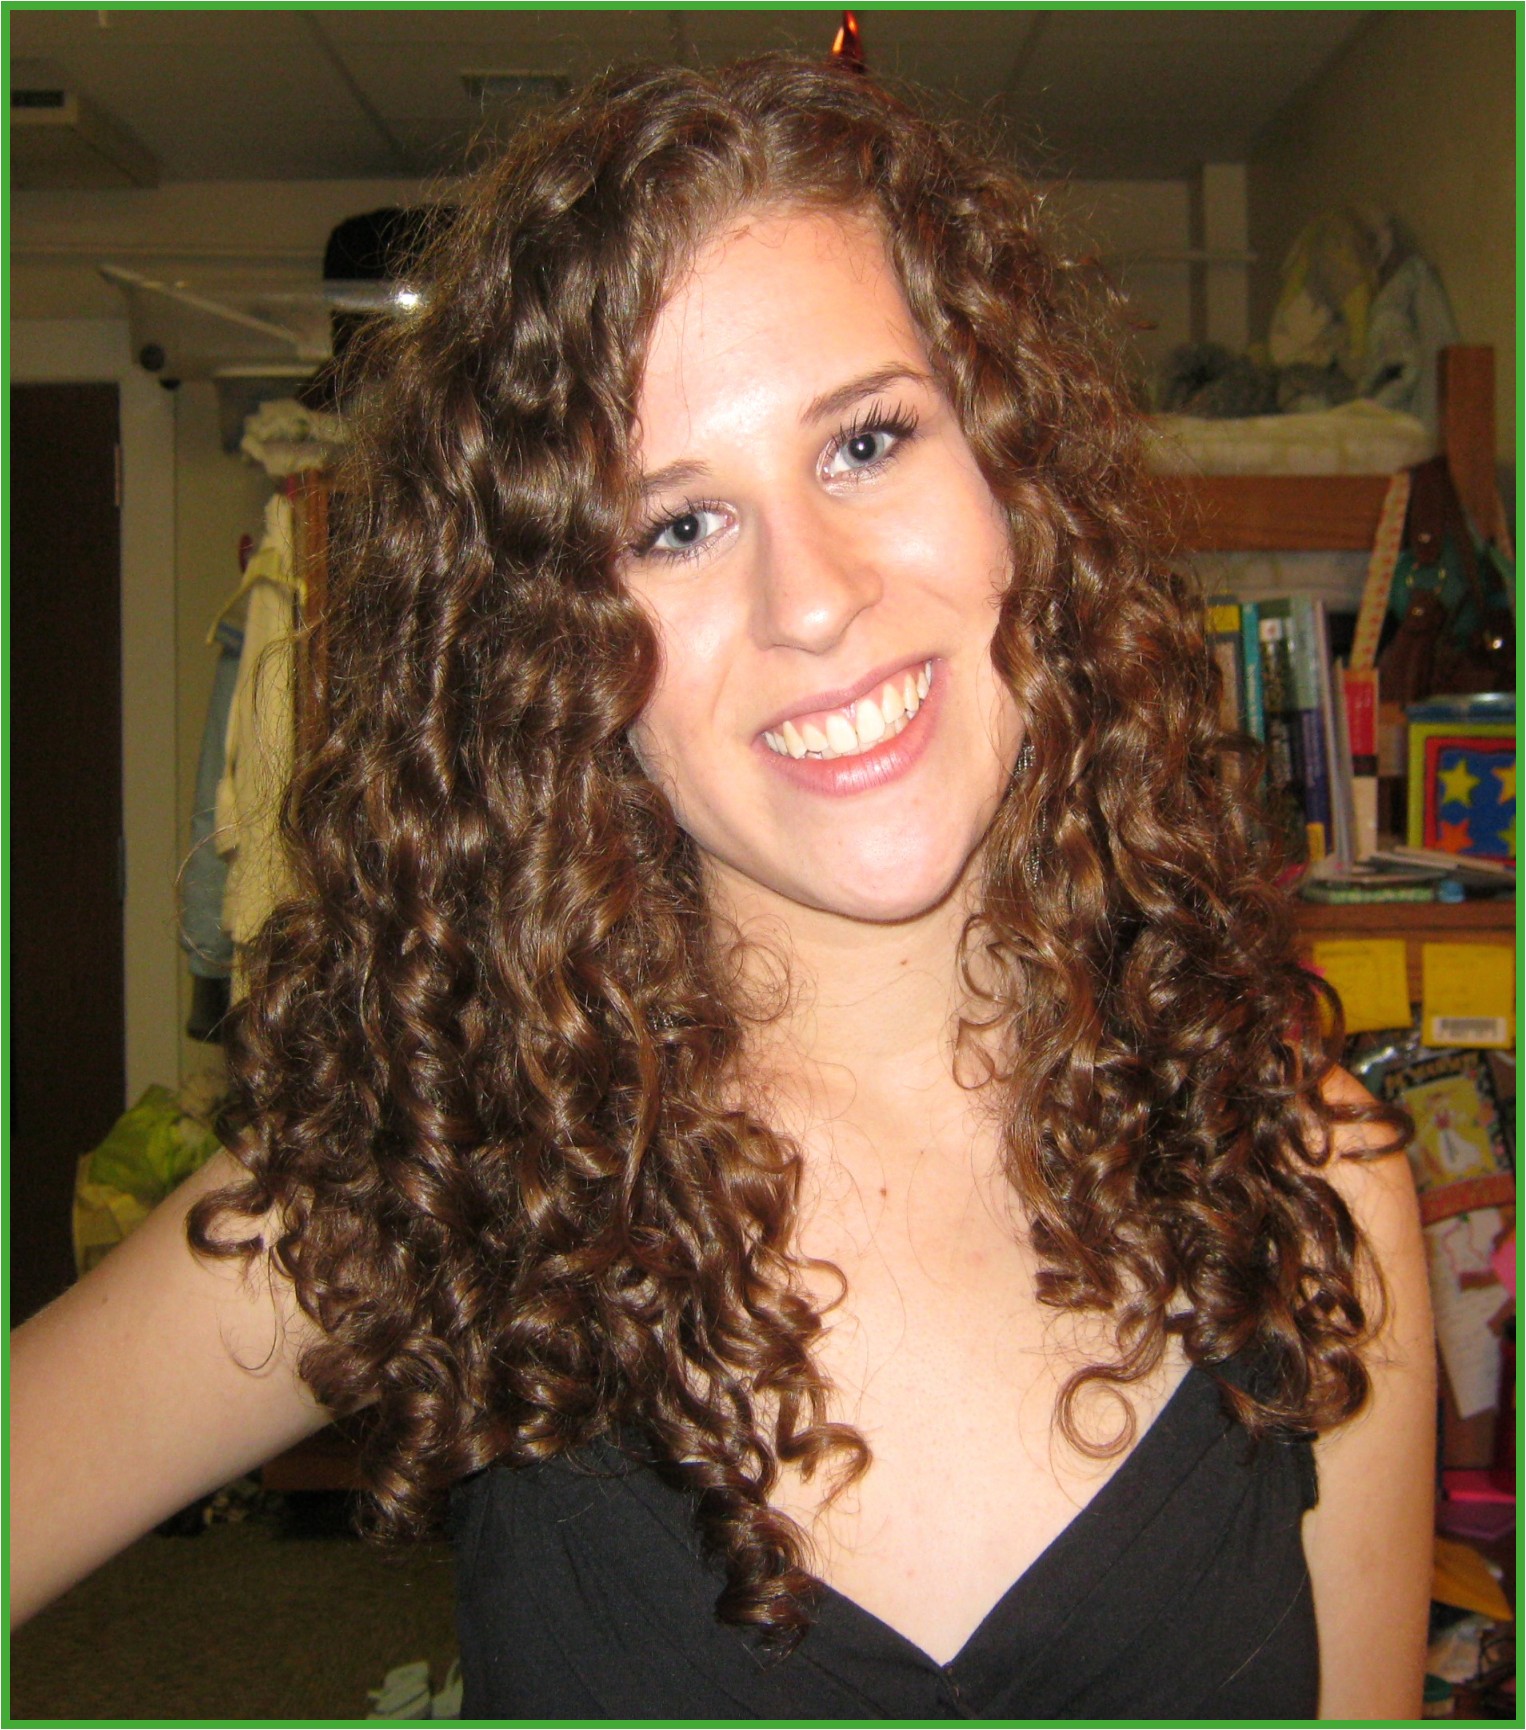 Curled Hairstyles with Braids Exciting Very Curly Hairstyles Fresh Curly Hair 0d Archives Hair